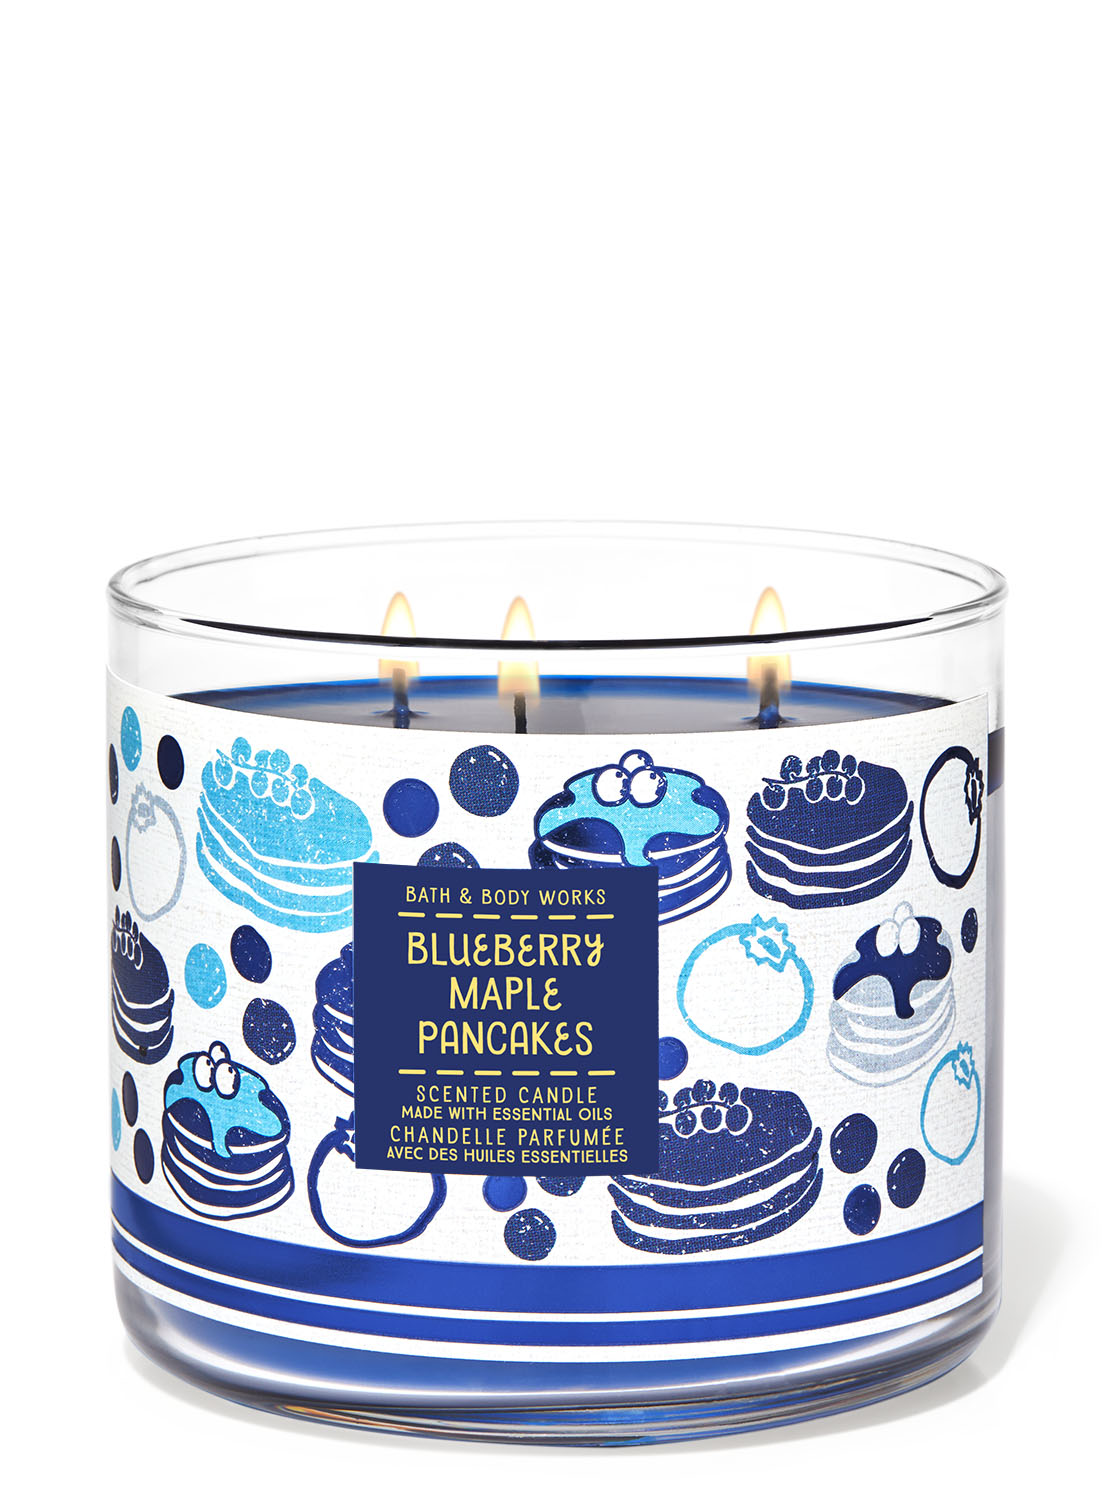 1 Bath & Body Works BLUEBERRY MAPLE PANCAKES Large 3-Wick Scented Candle 14.5 oz 